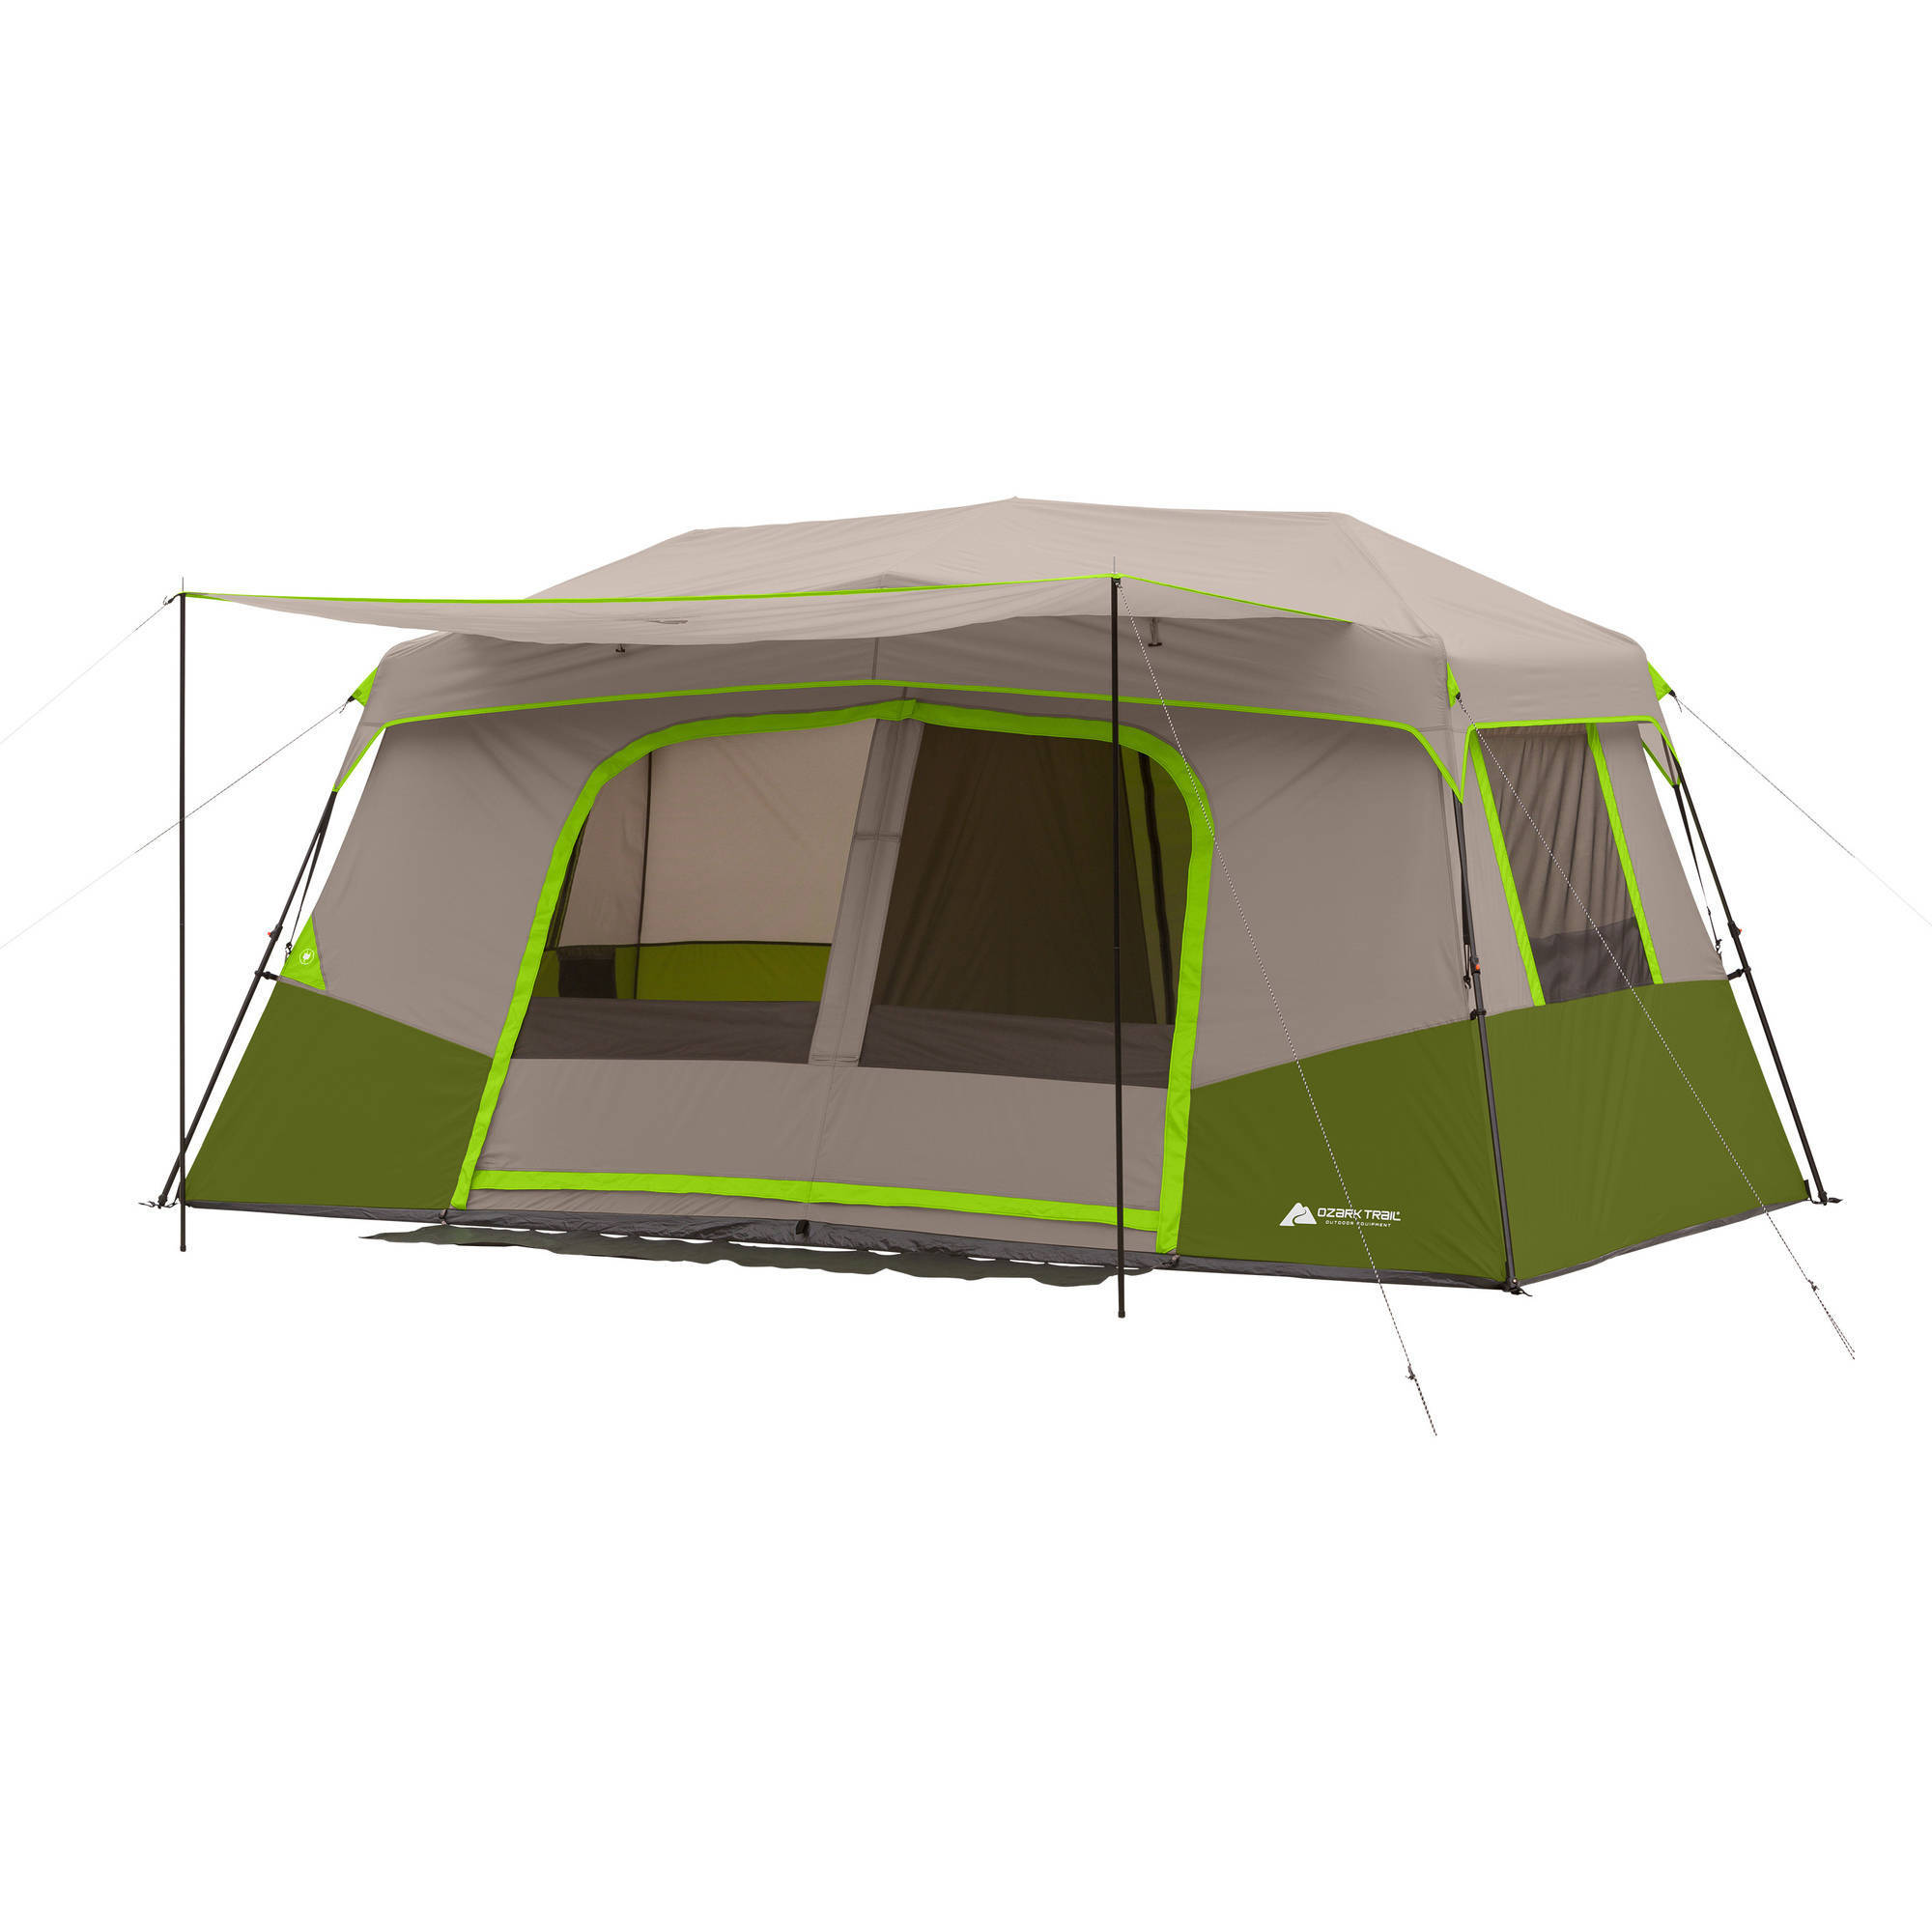 Ozark Trail 11-Person Instant Cabin Tent with Private Room - image 1 of 8